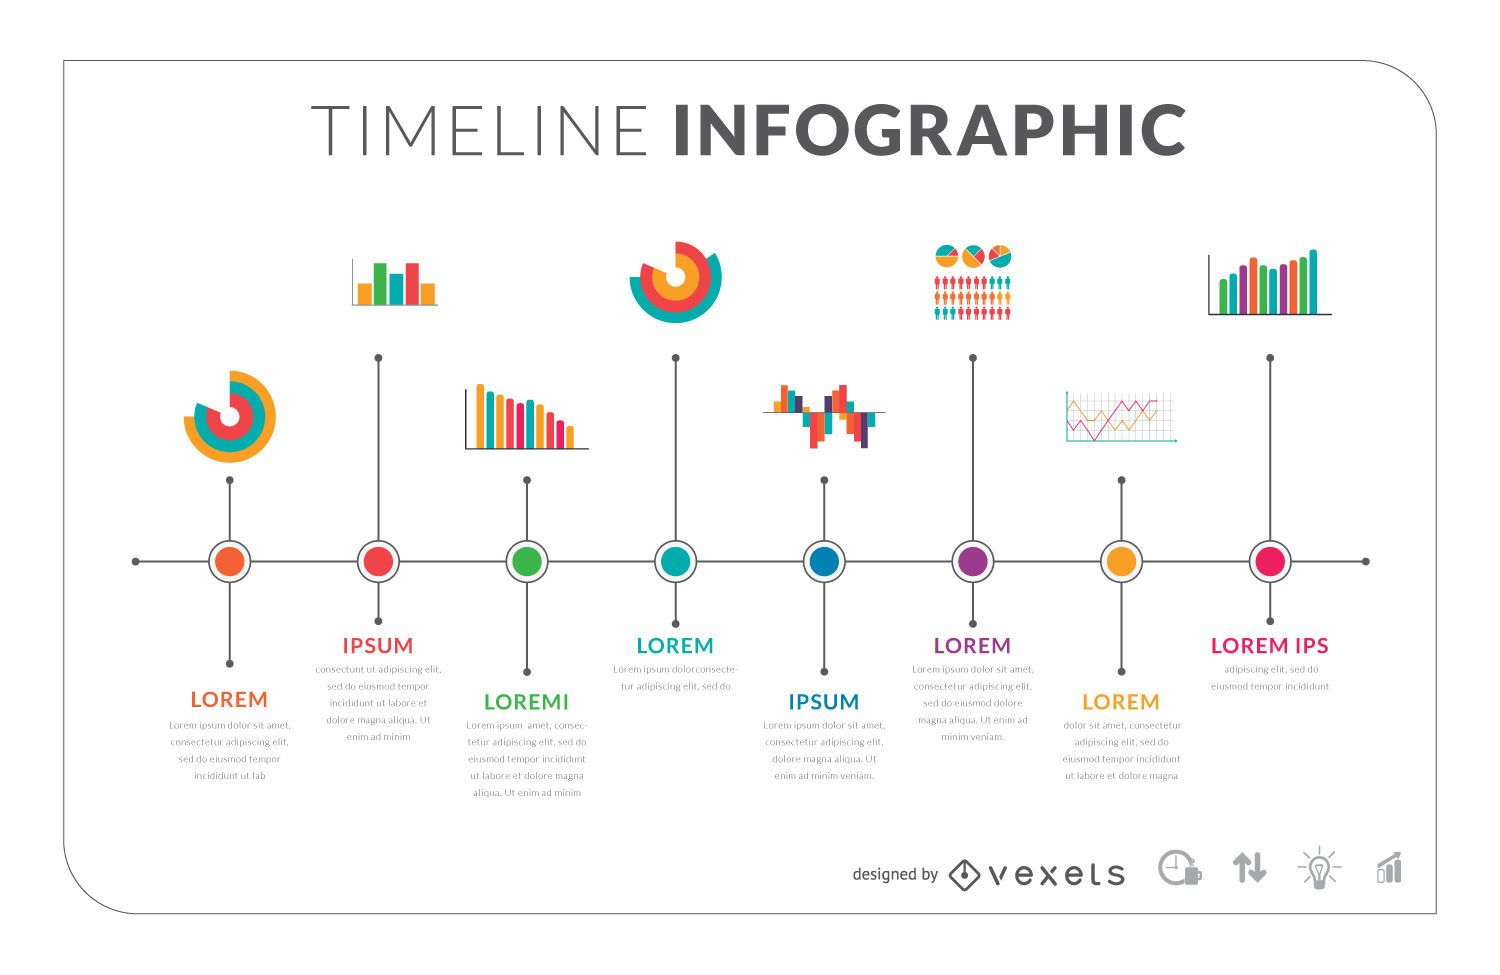 Timeline Infographic Template Vector | Free Vector Graphic Download